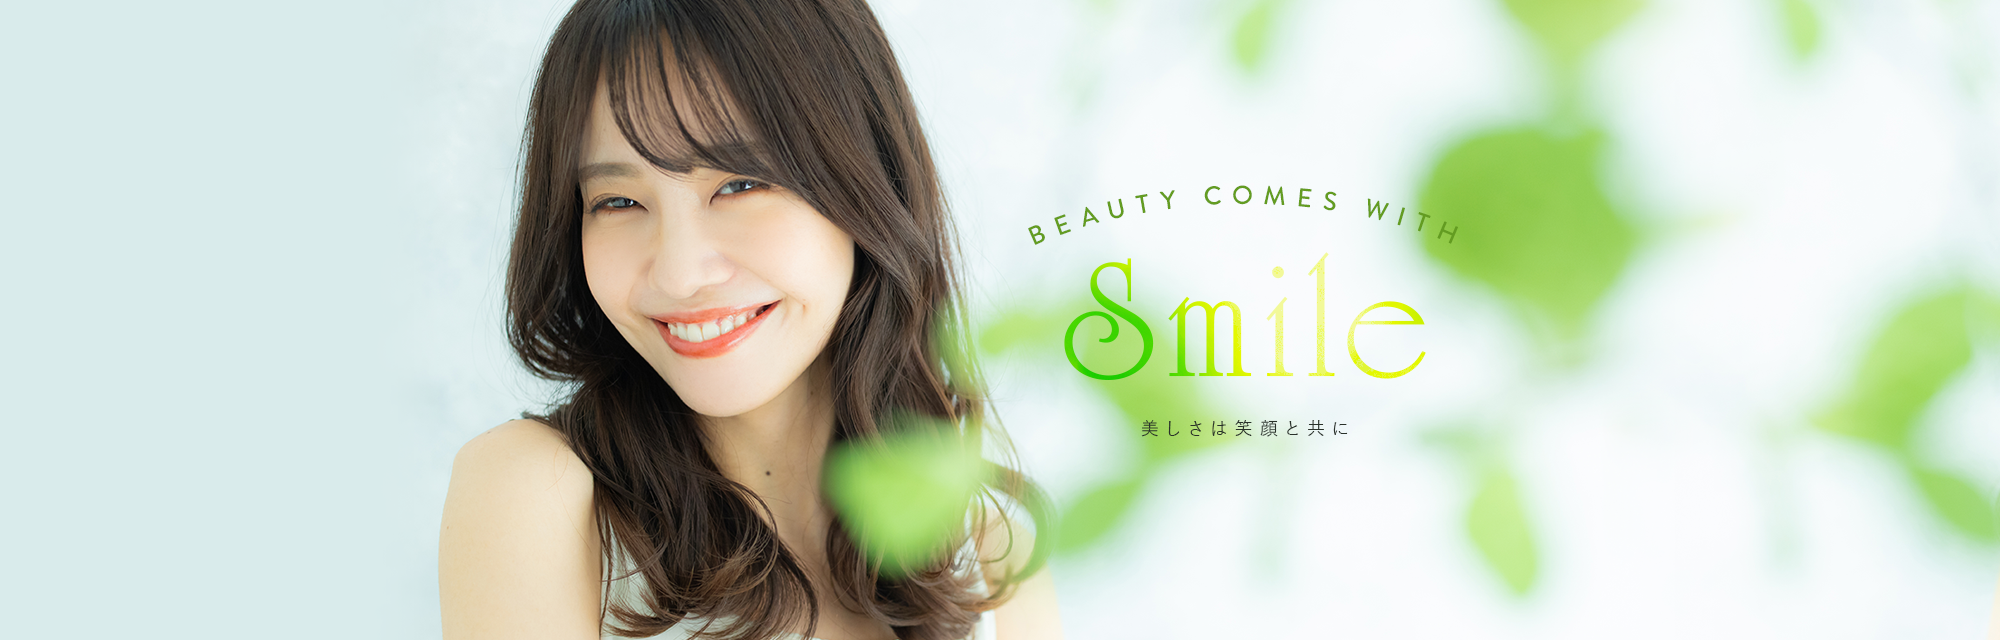 BEAUTY COMES WITH SMILE　美しさは笑顔と共に